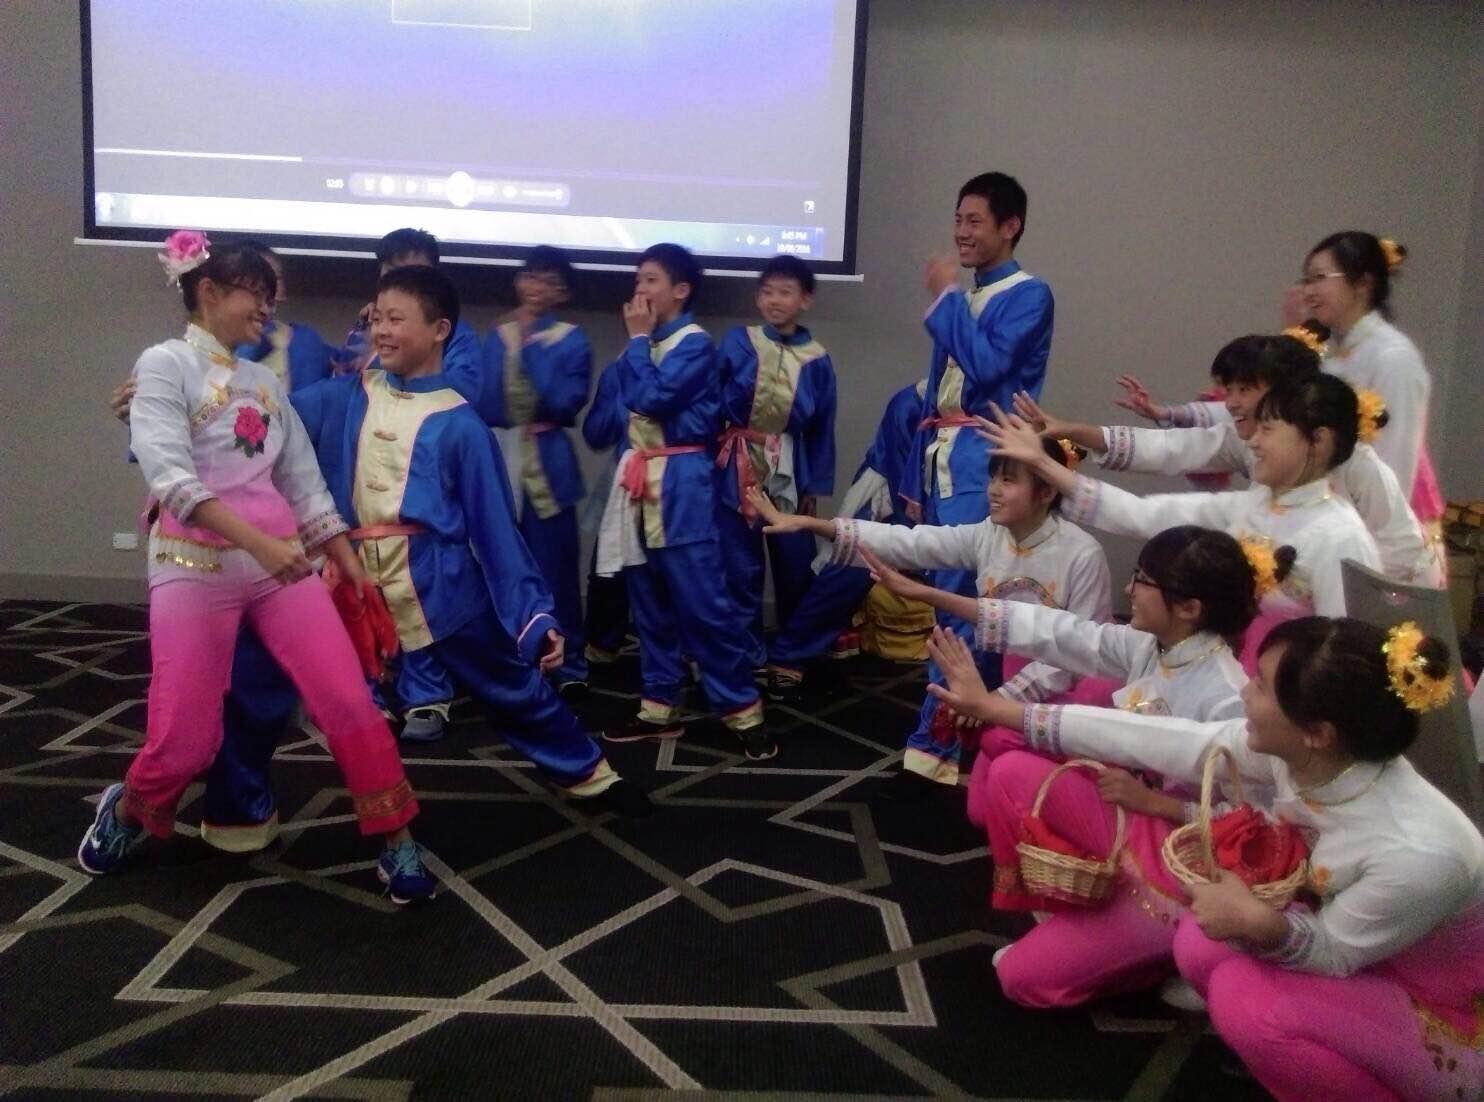 Min-De students performed Taiwanese folk dance to introduce Taiwan’s cultural diversity to Melrose students.